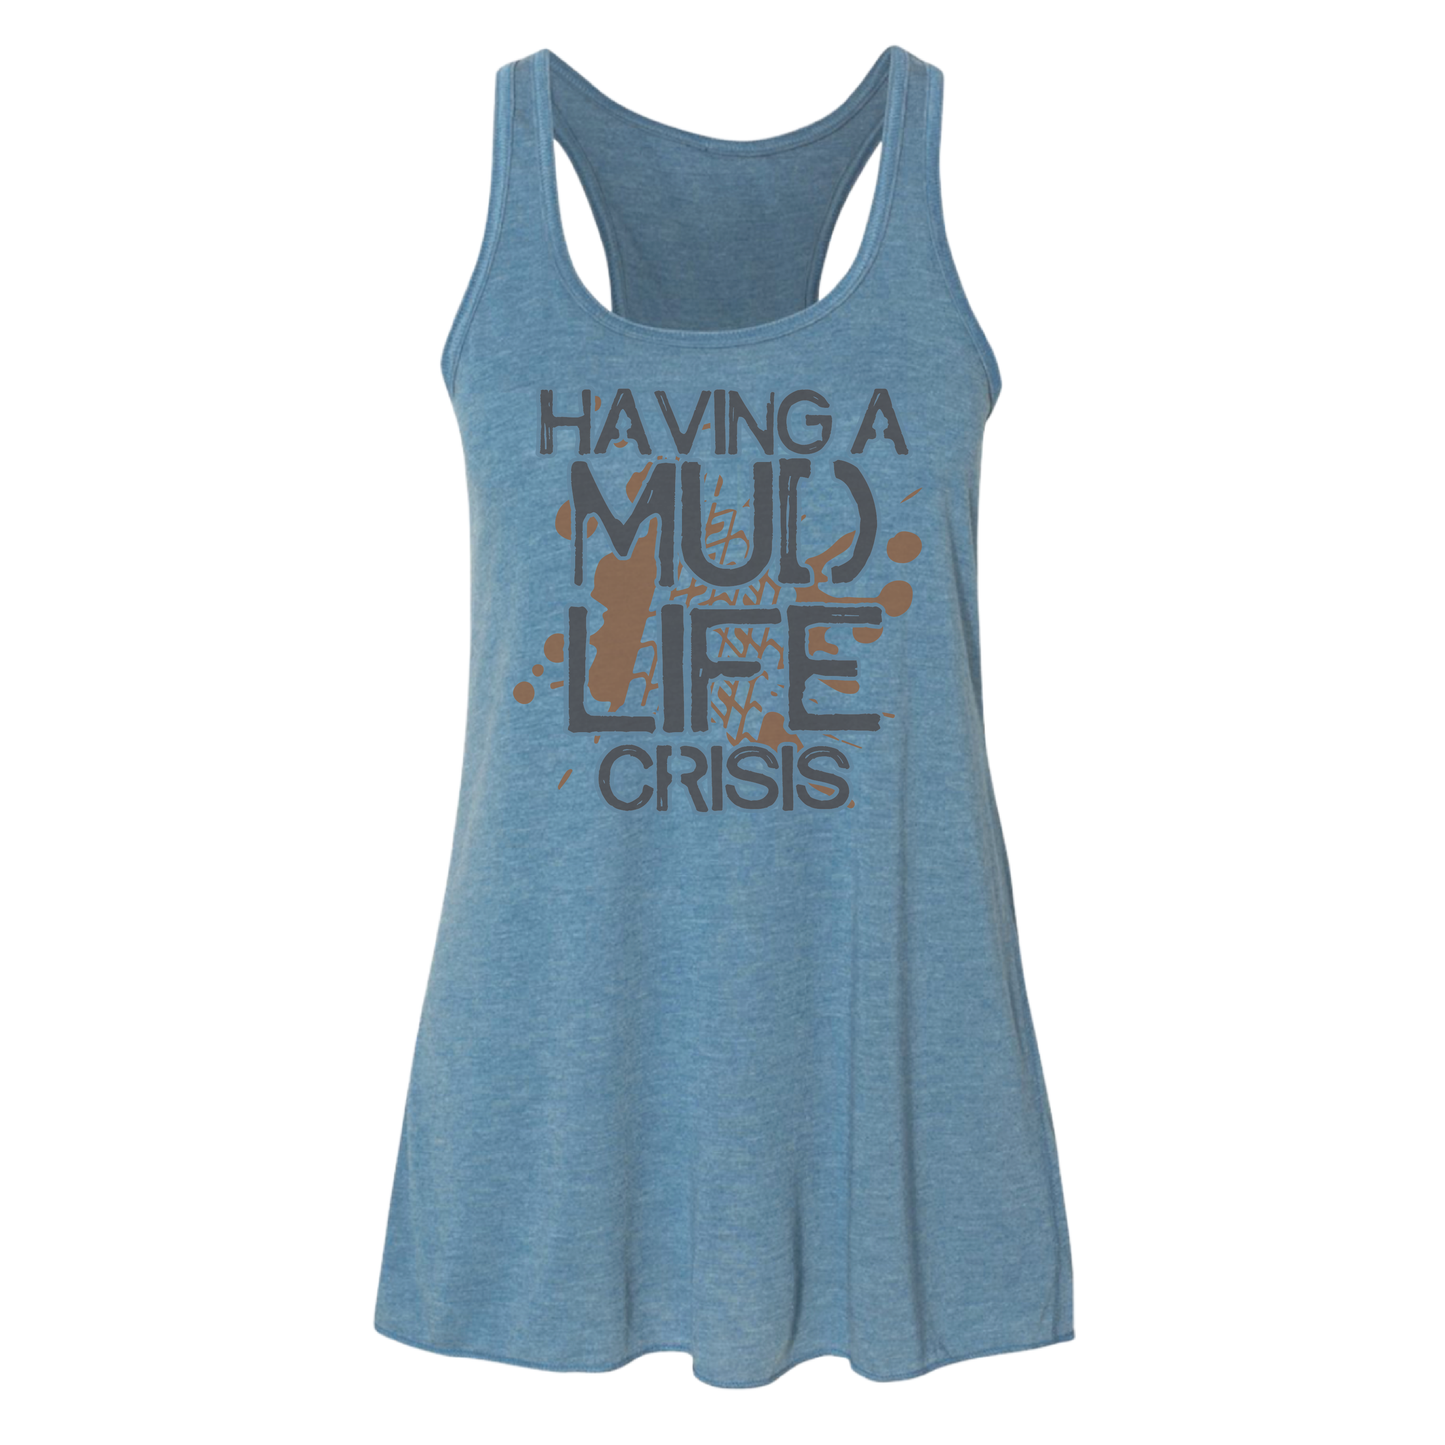 Mud Life - Shirt, Tank Top, Long Sleeve or Hoodie - Available in Multiple Colors